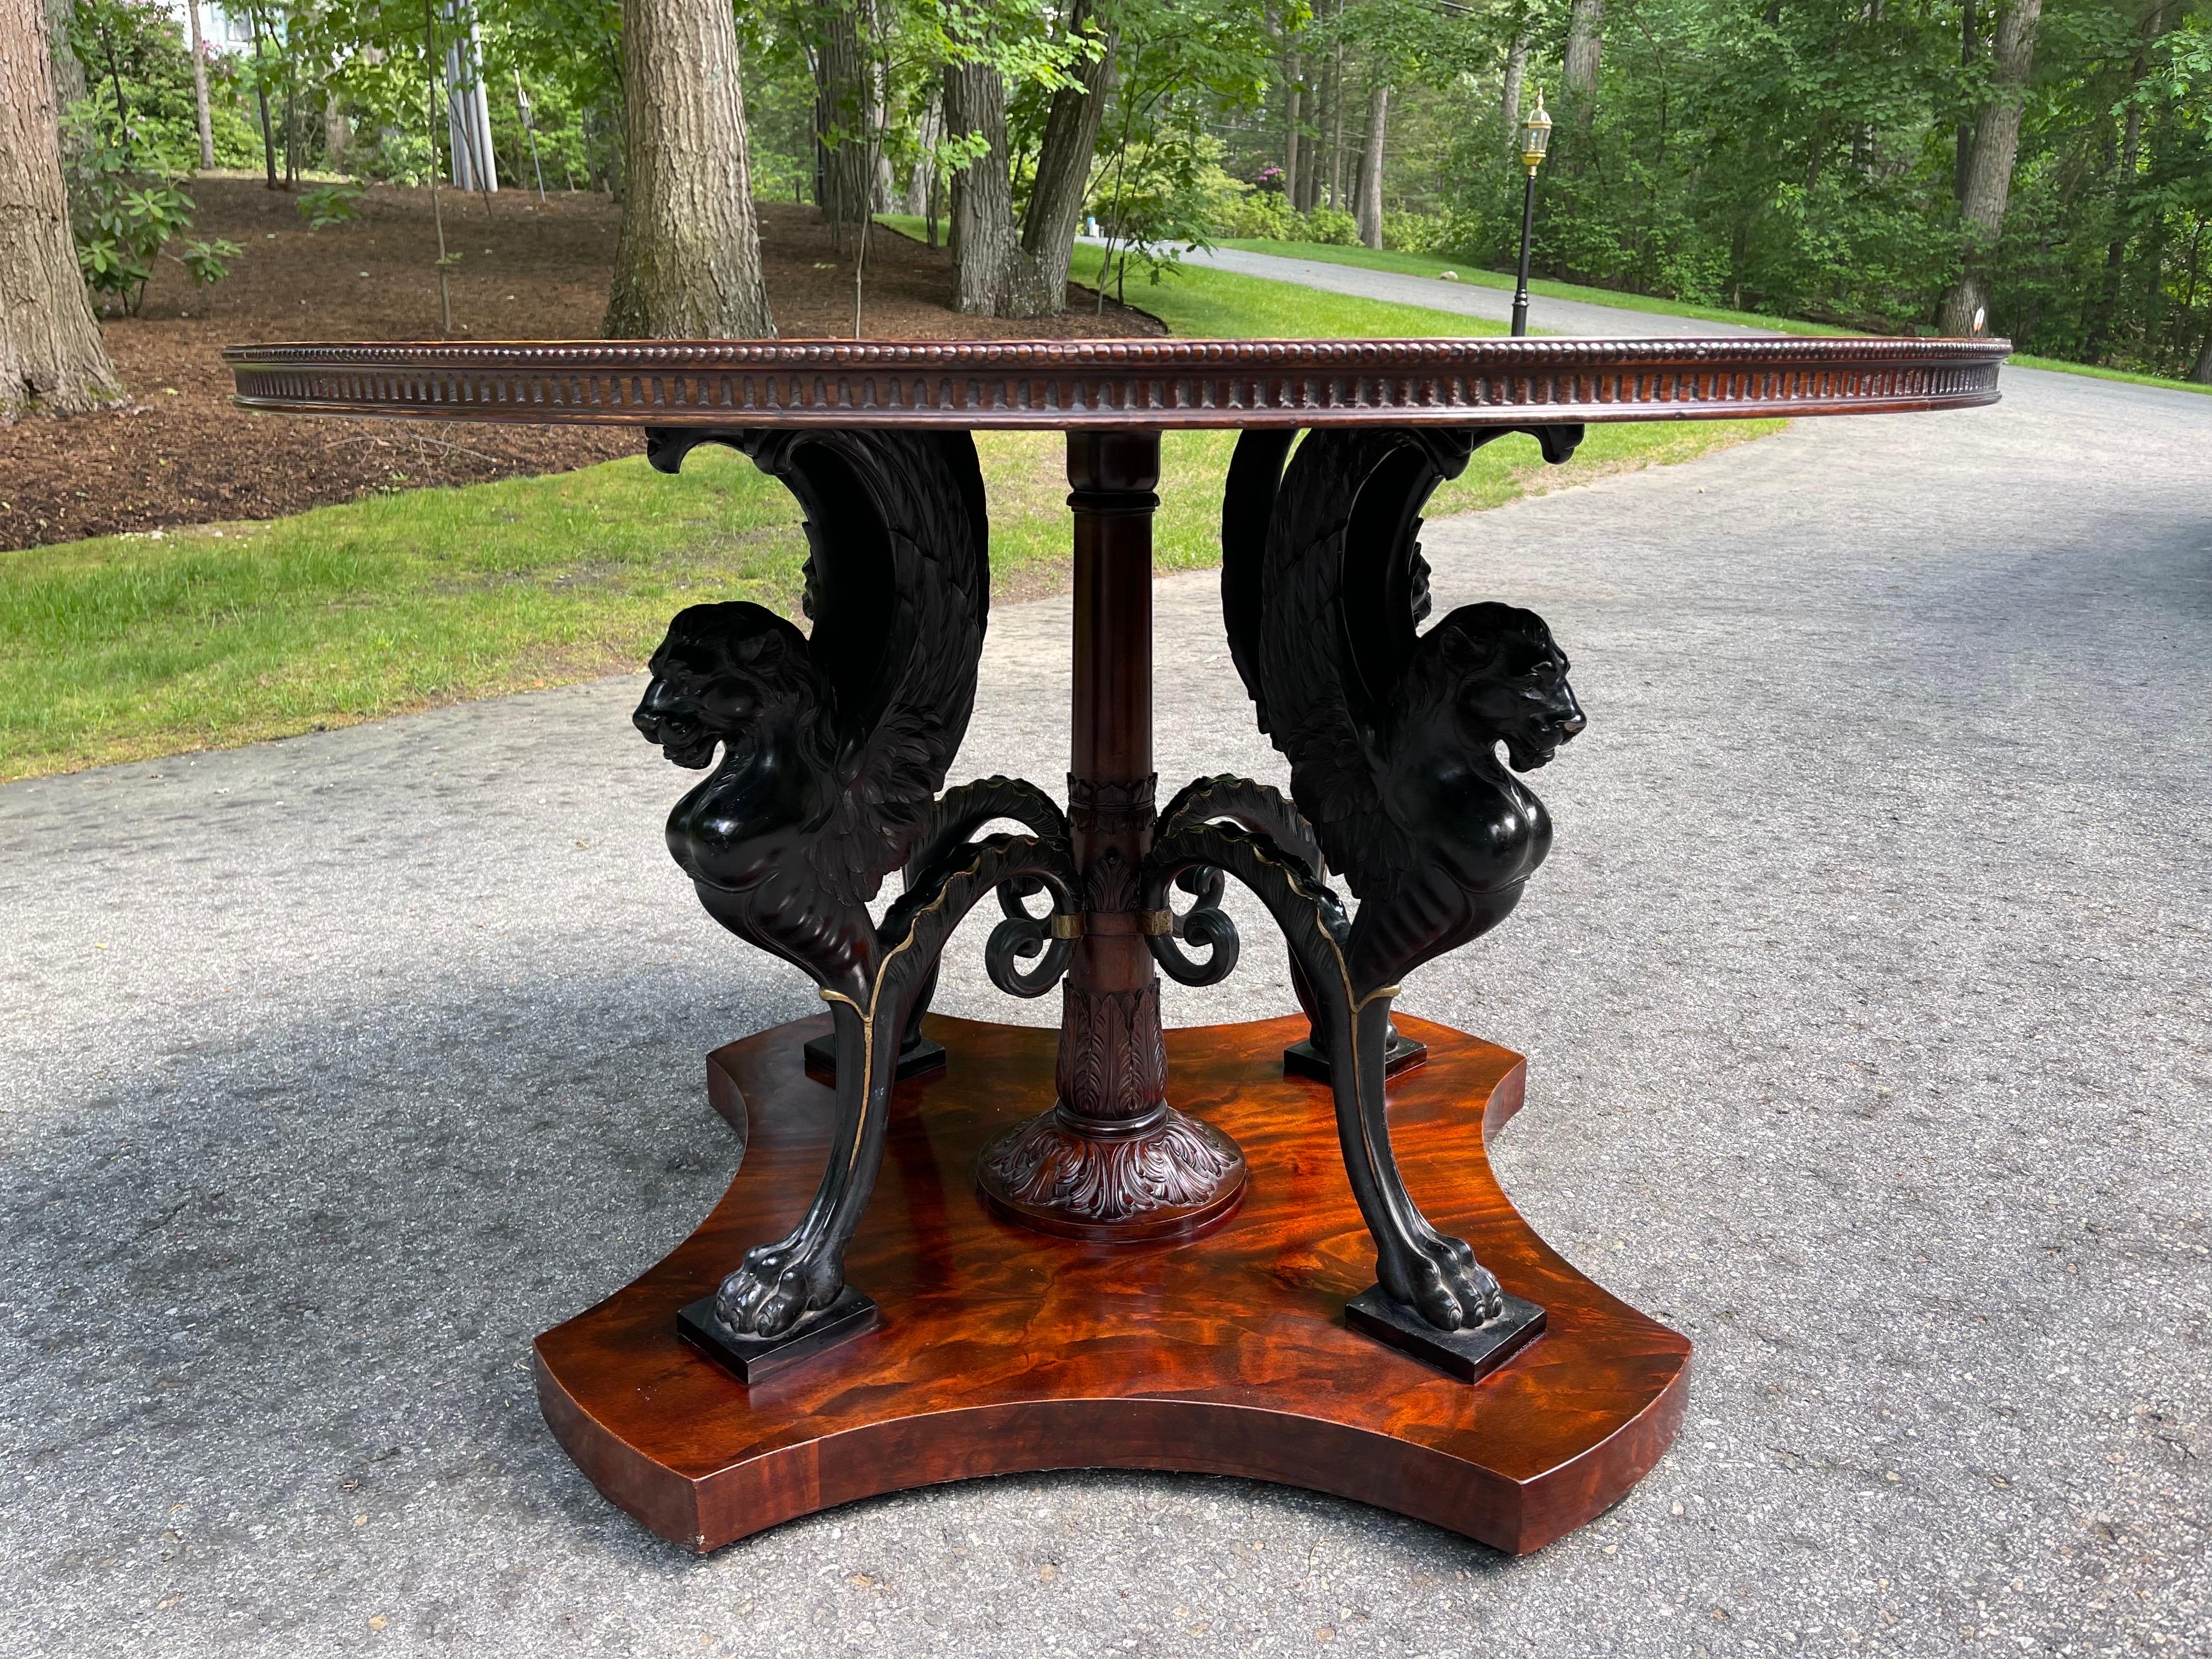 A rare English Neoclassical center table. Resting on a raised pedestal four finely carved winged lion griffins support a magnificent book matched Mahogany top. 
The Quality and craftsmanship is hard to find.
 